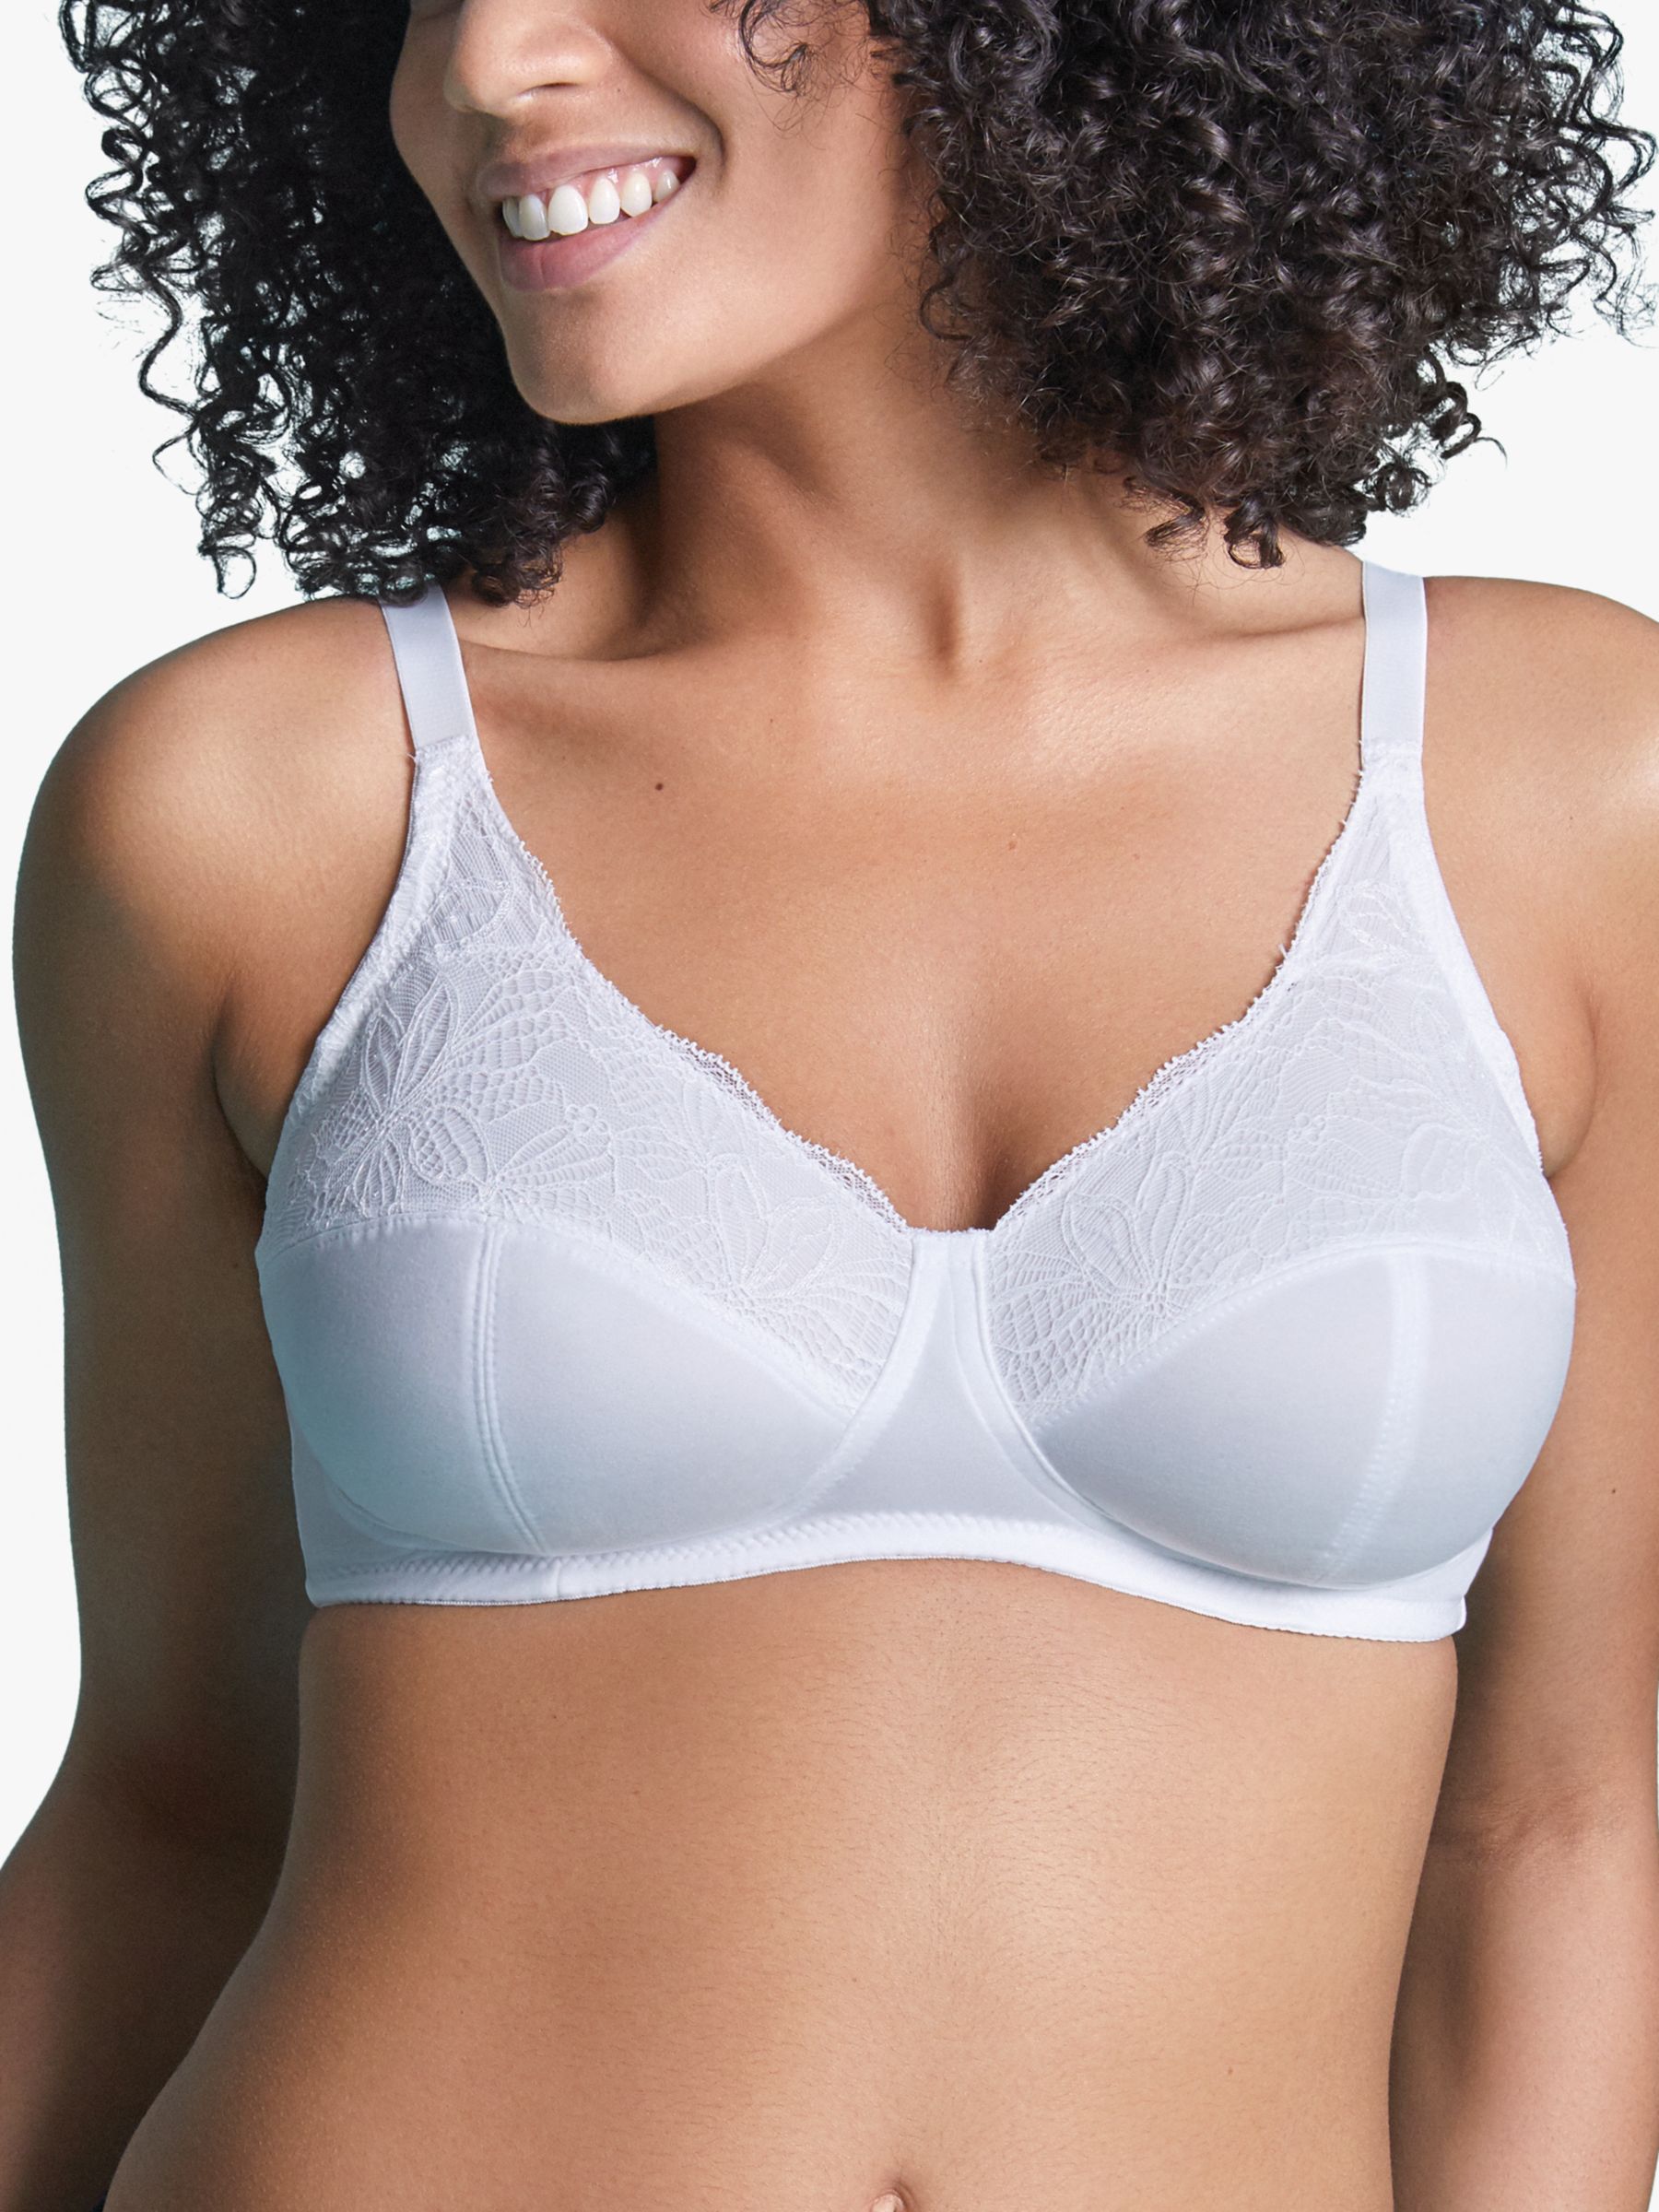 Size 32B Bras: Shop Supportive And Comfortable Bras By Size